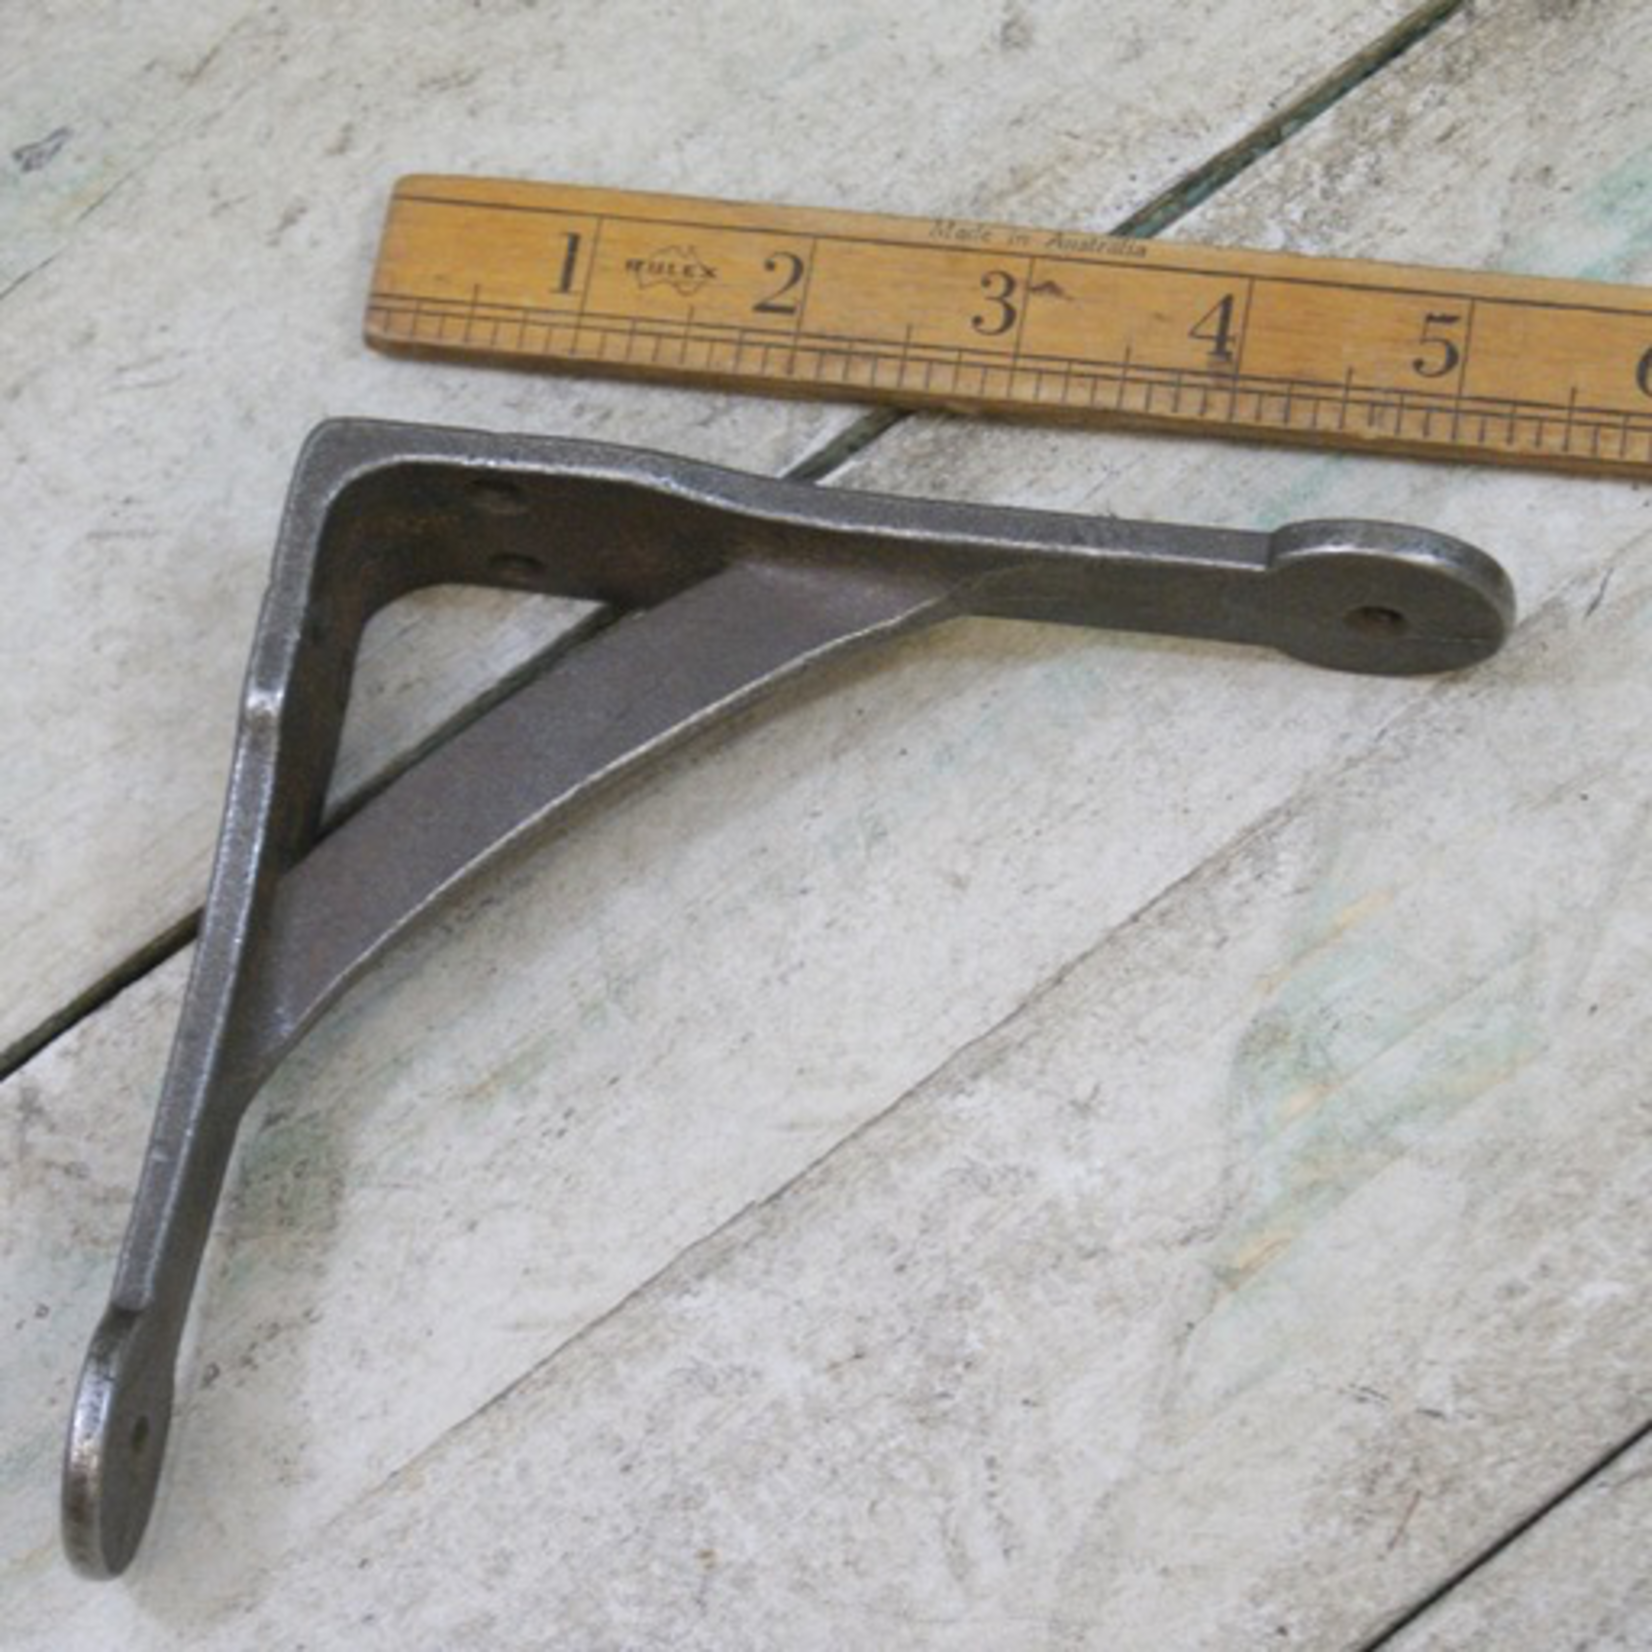 IRON RANGE Shelf Bracket Gallows Penny End Cast Ant Iron 13.2cm x 13.2 cm (approx just over 5”x 5”)